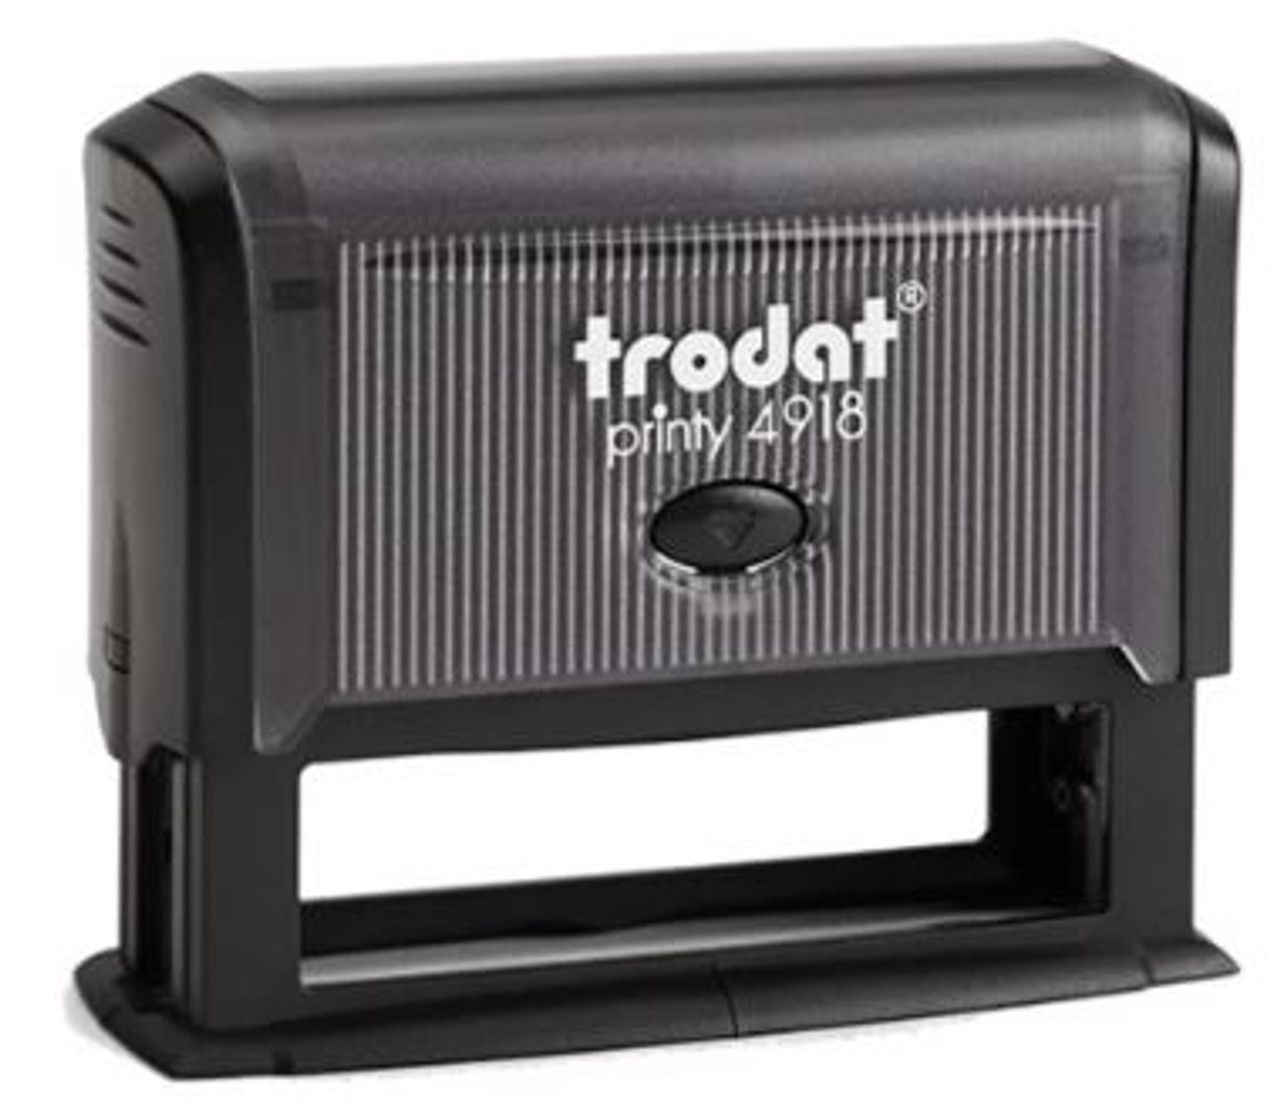  Custom Signature Stamp - Self Inking Personalized Signature  Stamp, Great for Signing Documents